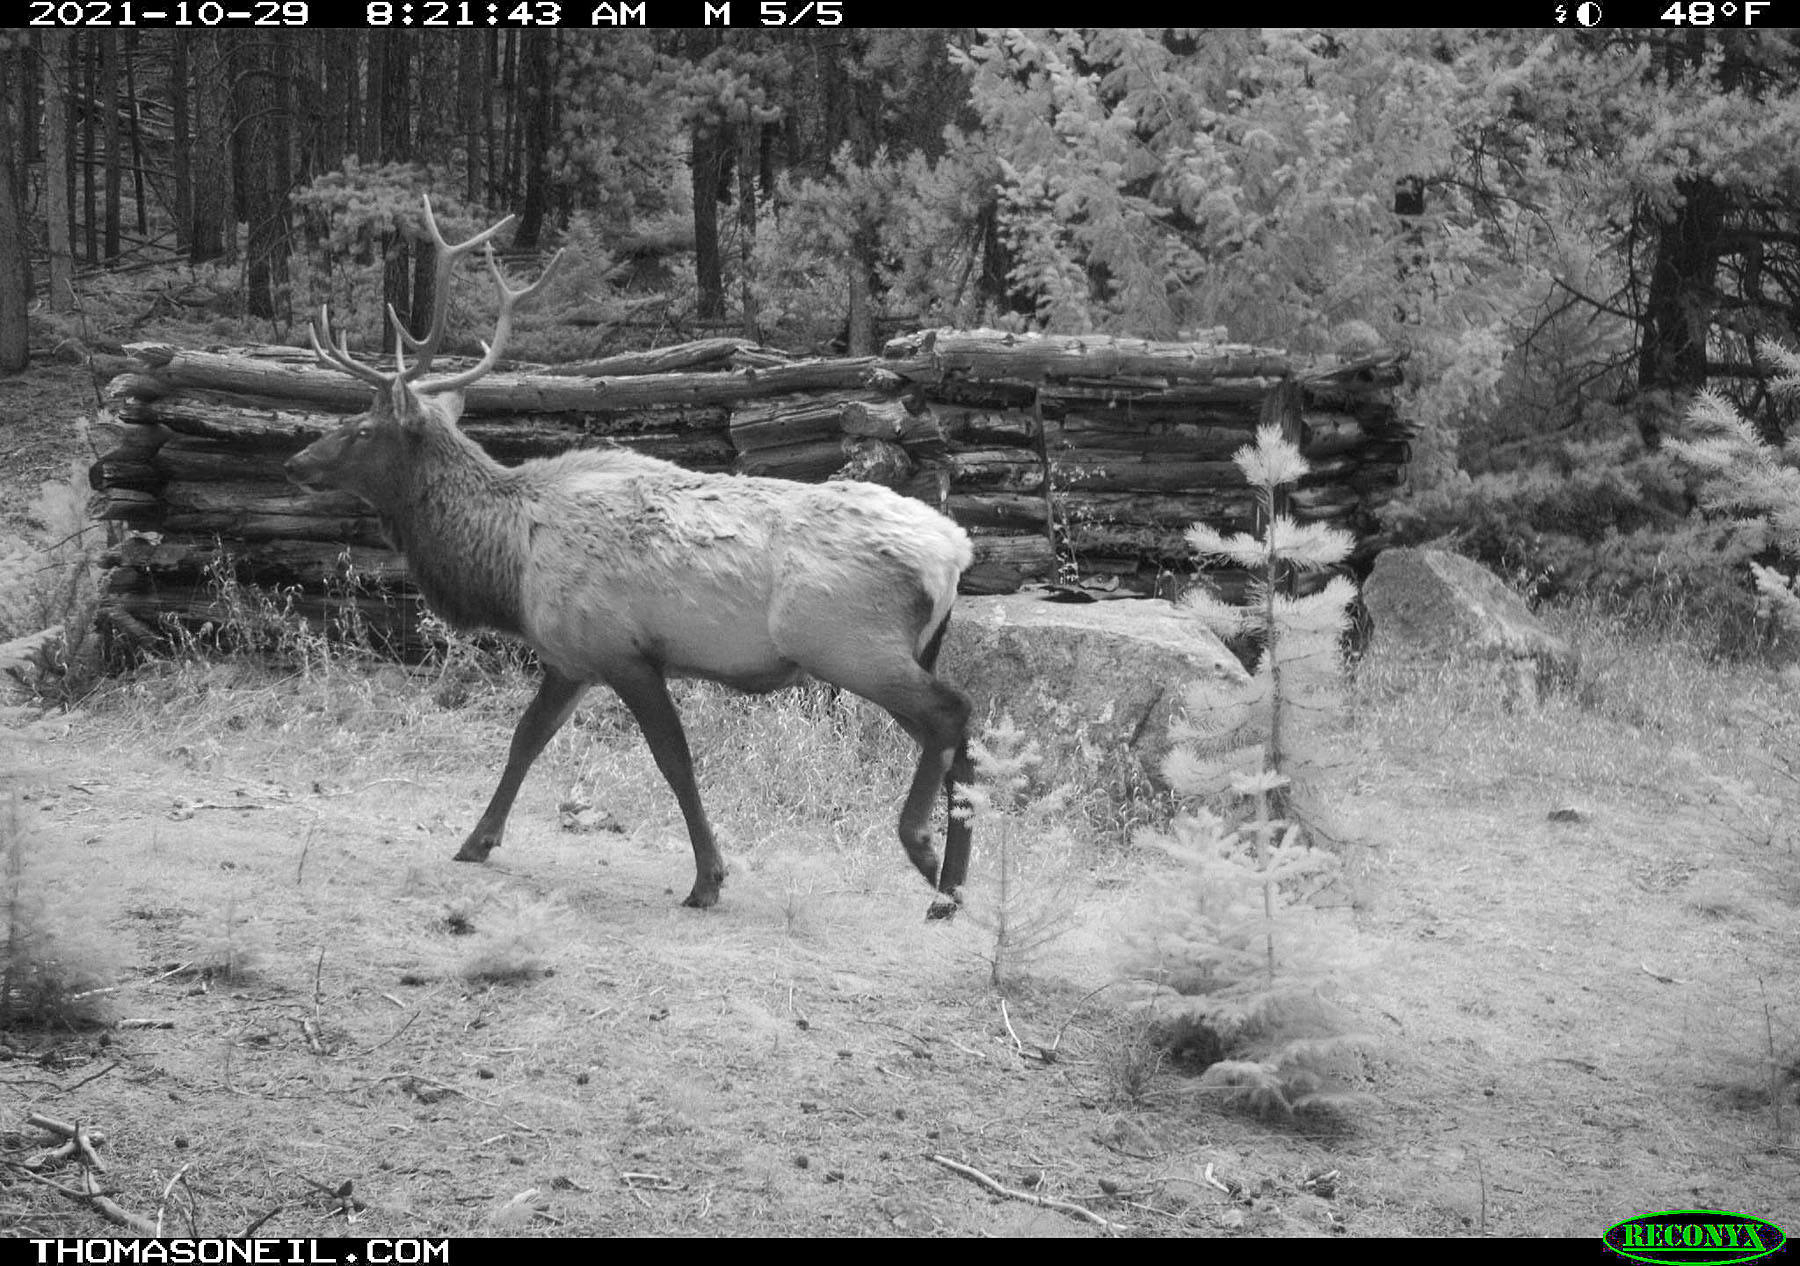 Elk near Red Lodge, MT, October 2021.  Click for next photo.